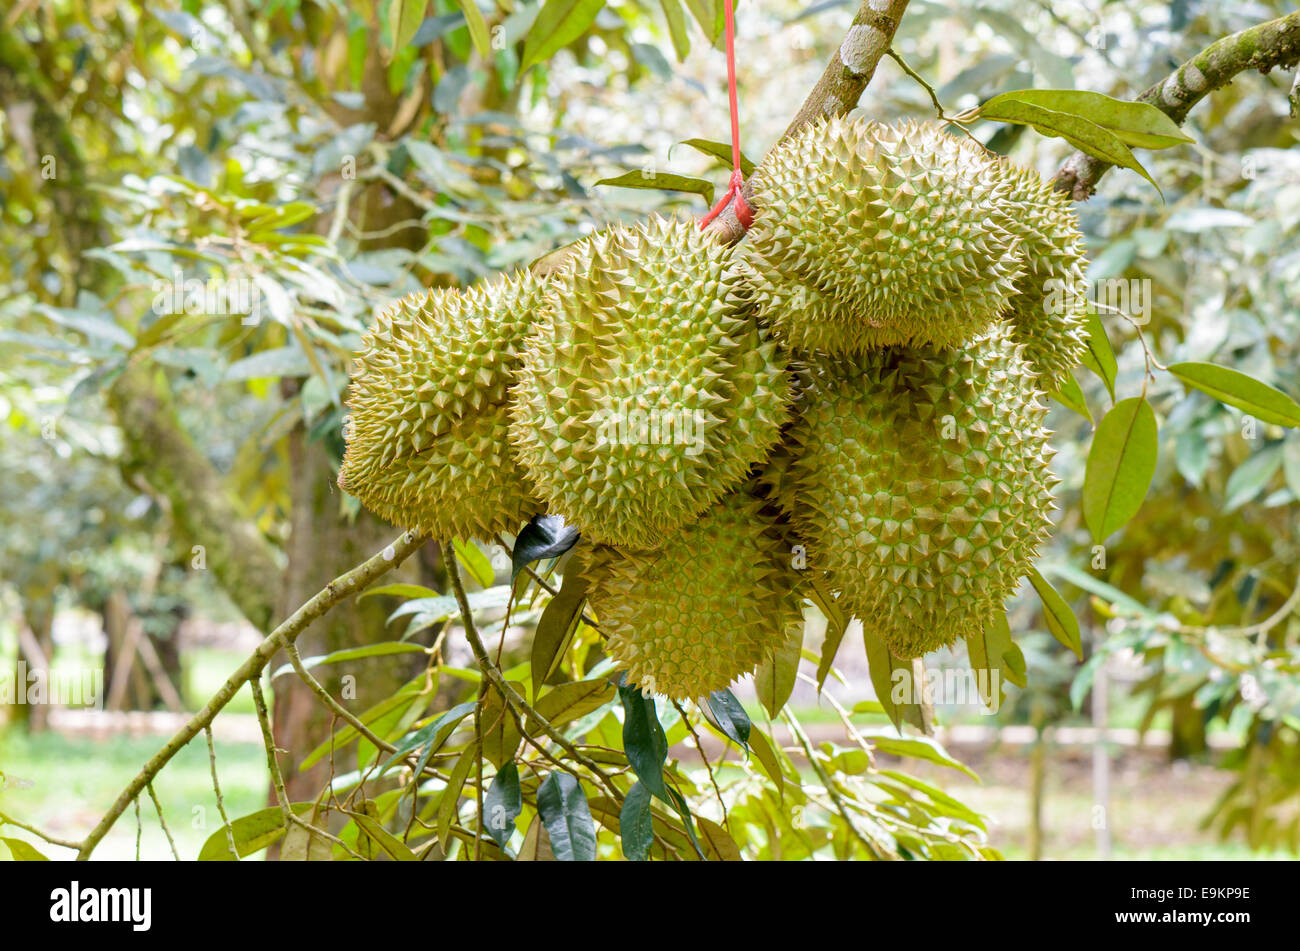 Durian ( Durio zibethinus ) on tree at orchard, King of fruits in Thailand Stock Photo